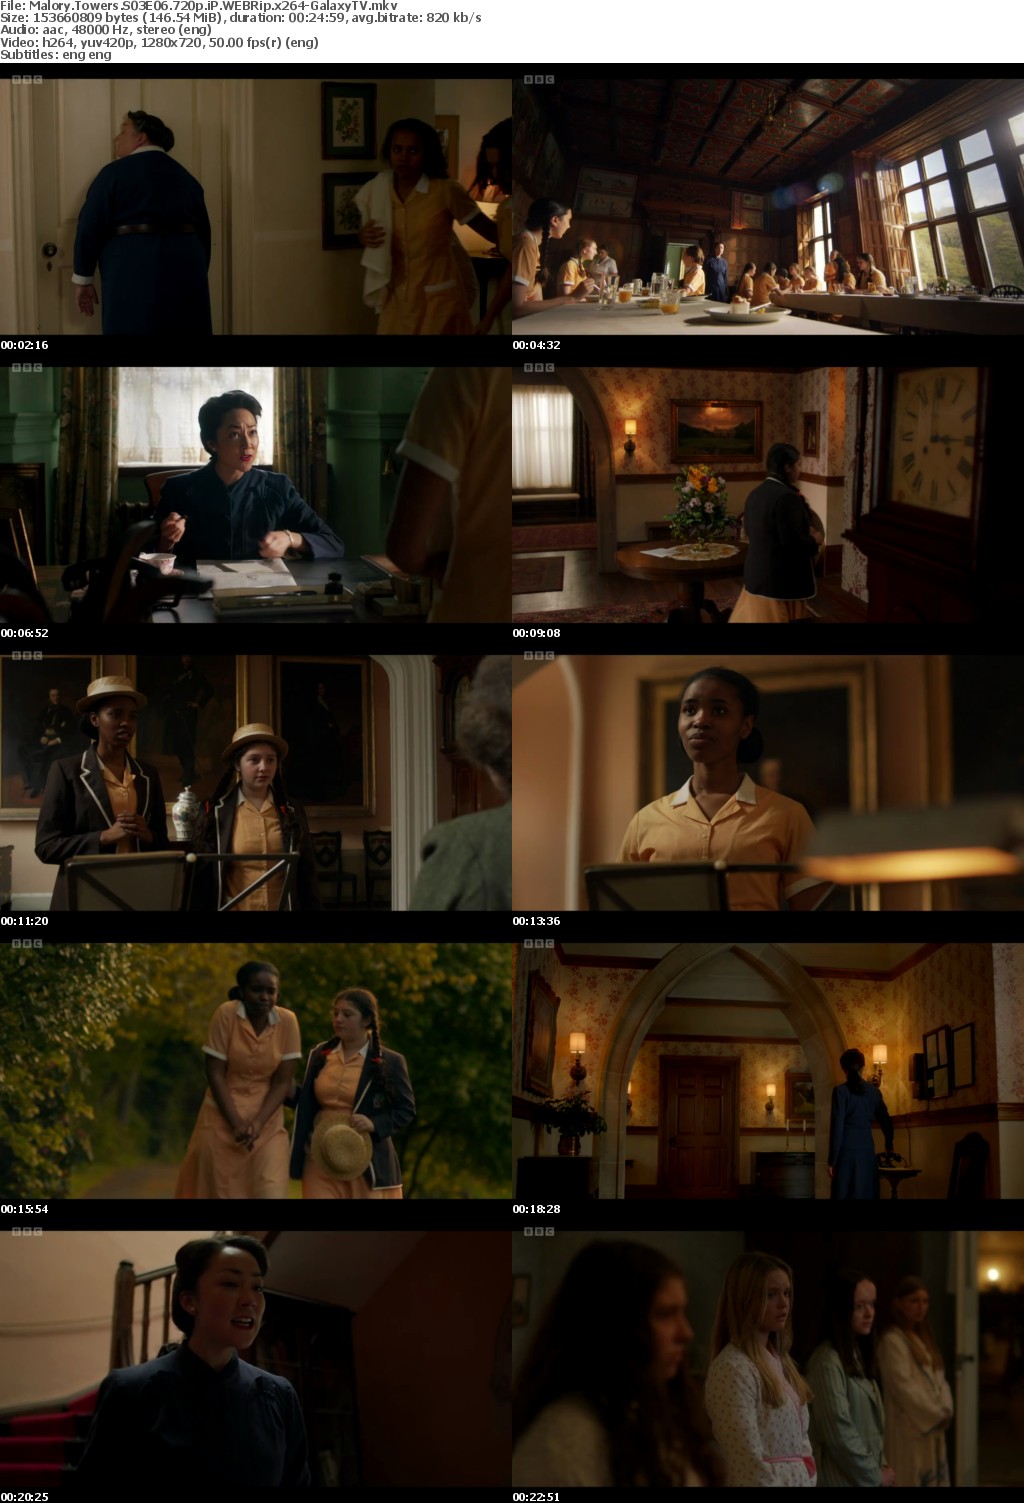 Malory Towers S03 COMPLETE 720p iP WEBRip x264-GalaxyTV